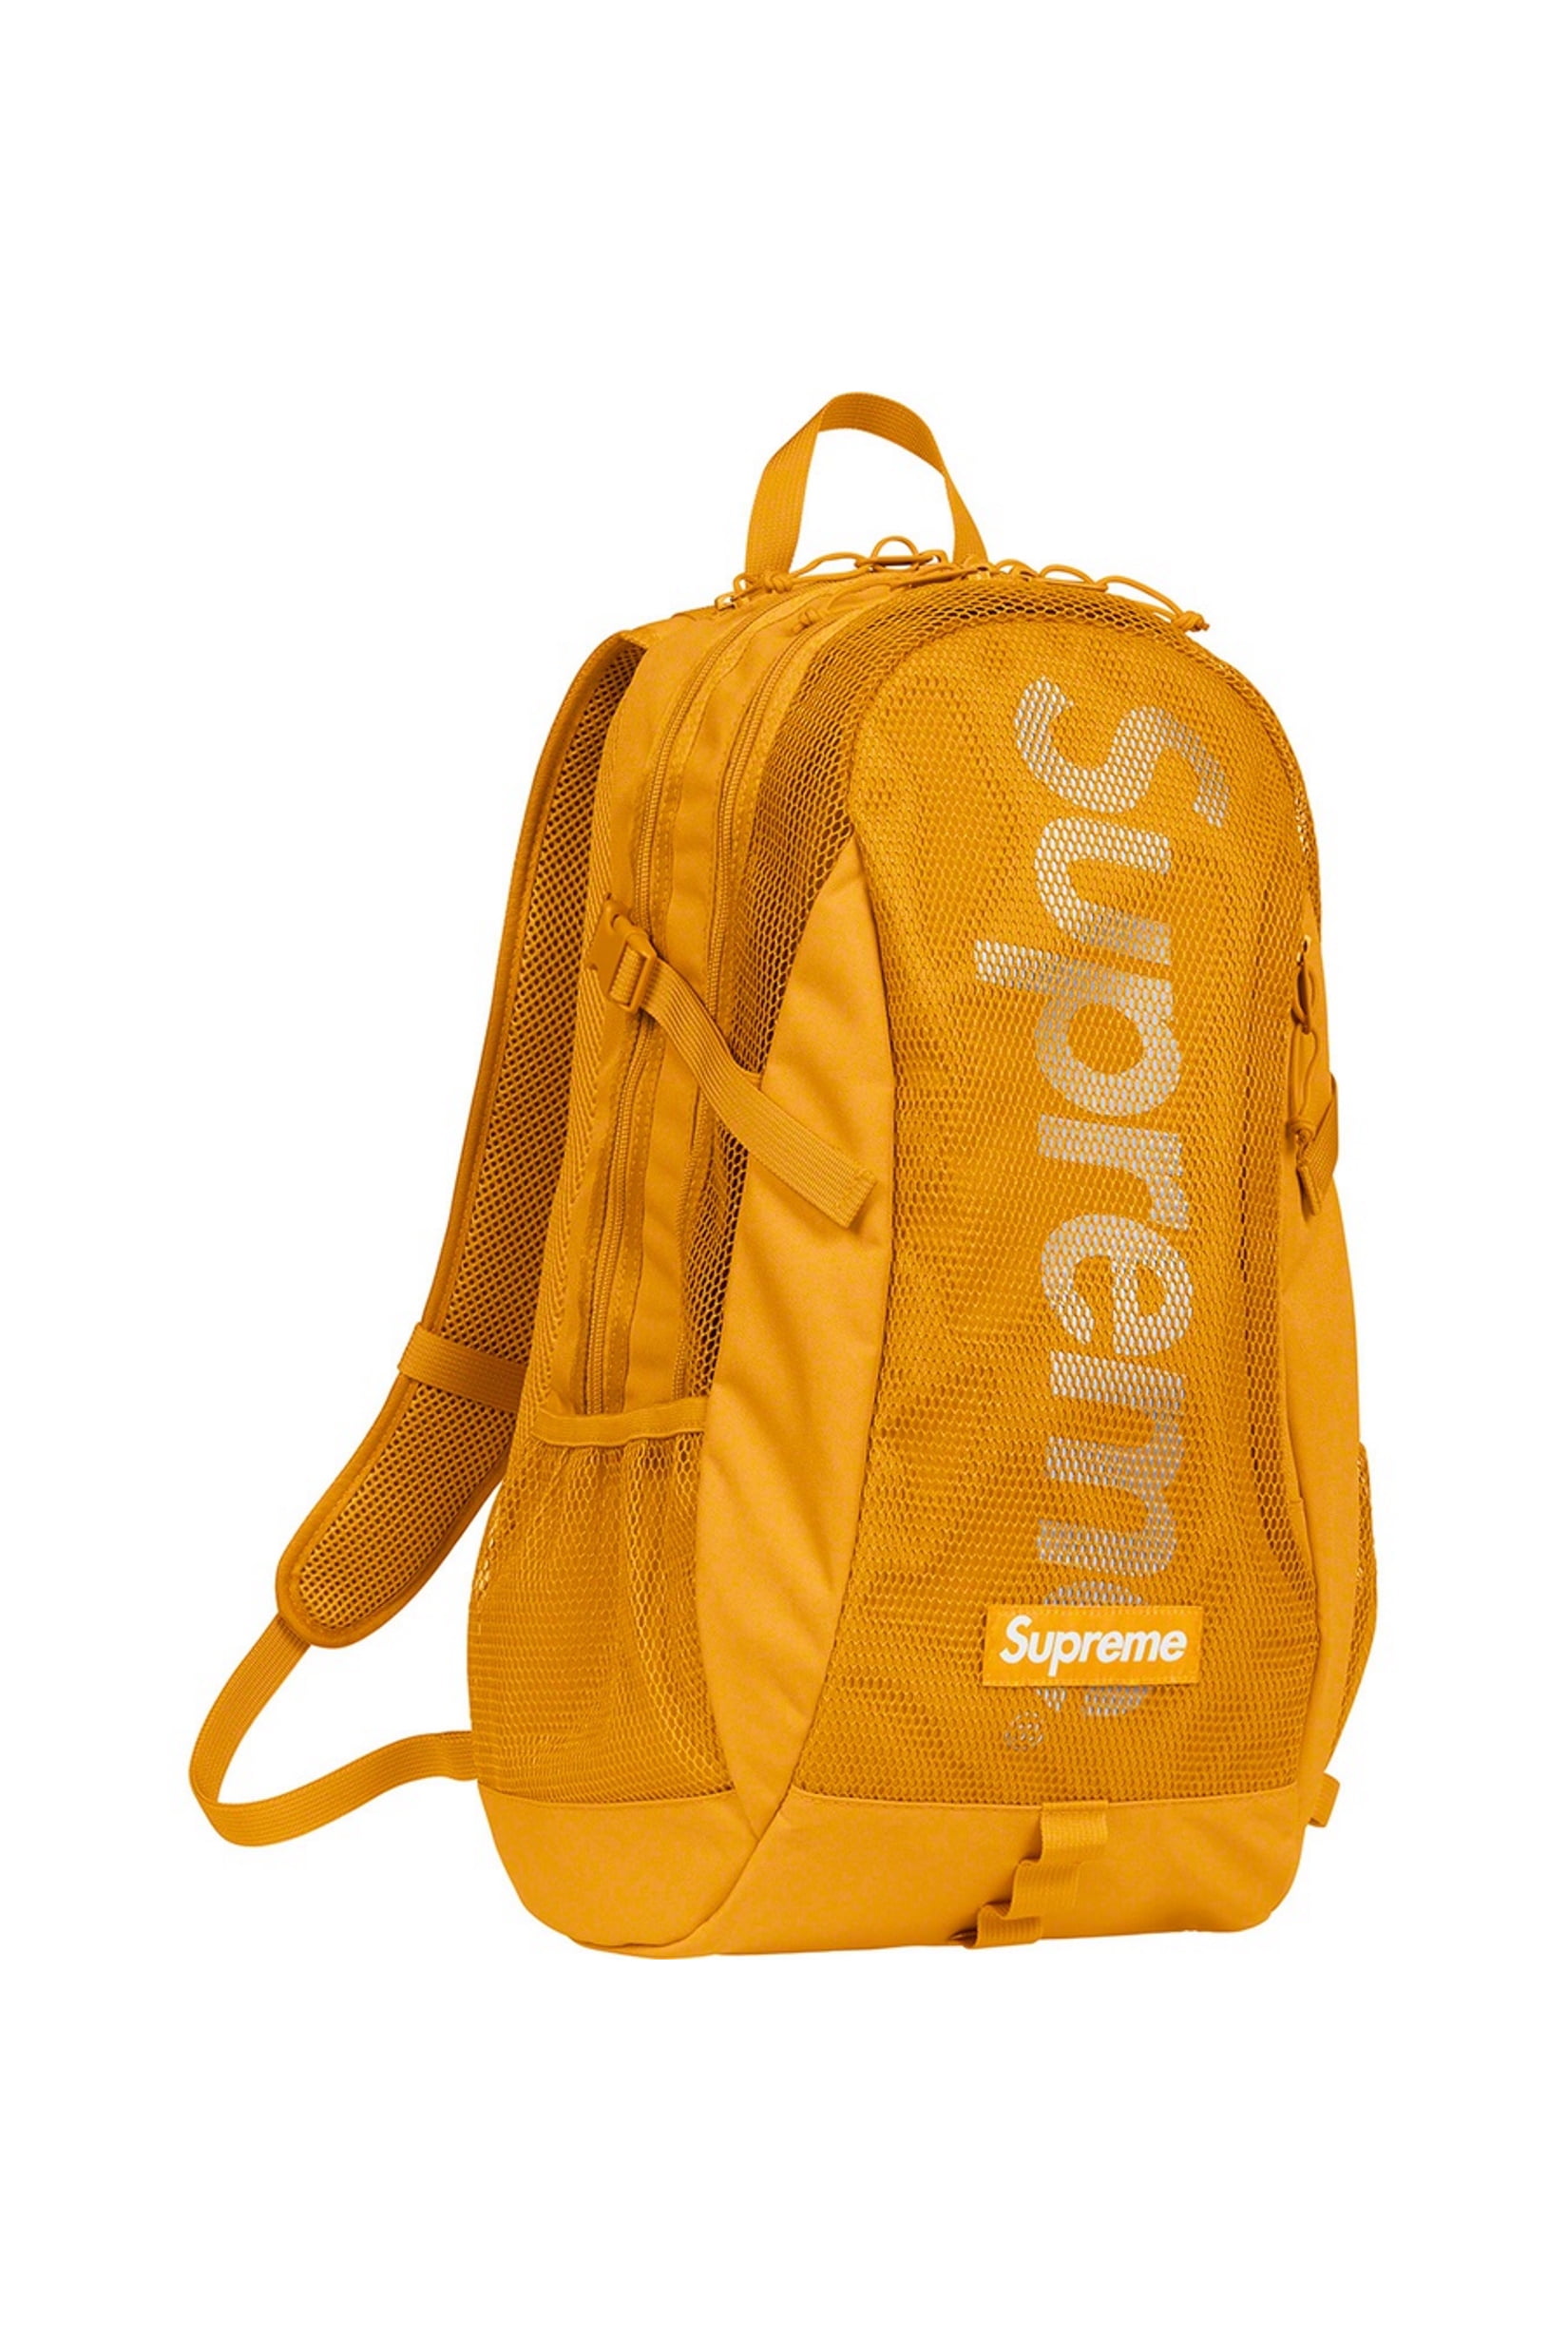 Supreme SS20 Backpack Review and Try-On